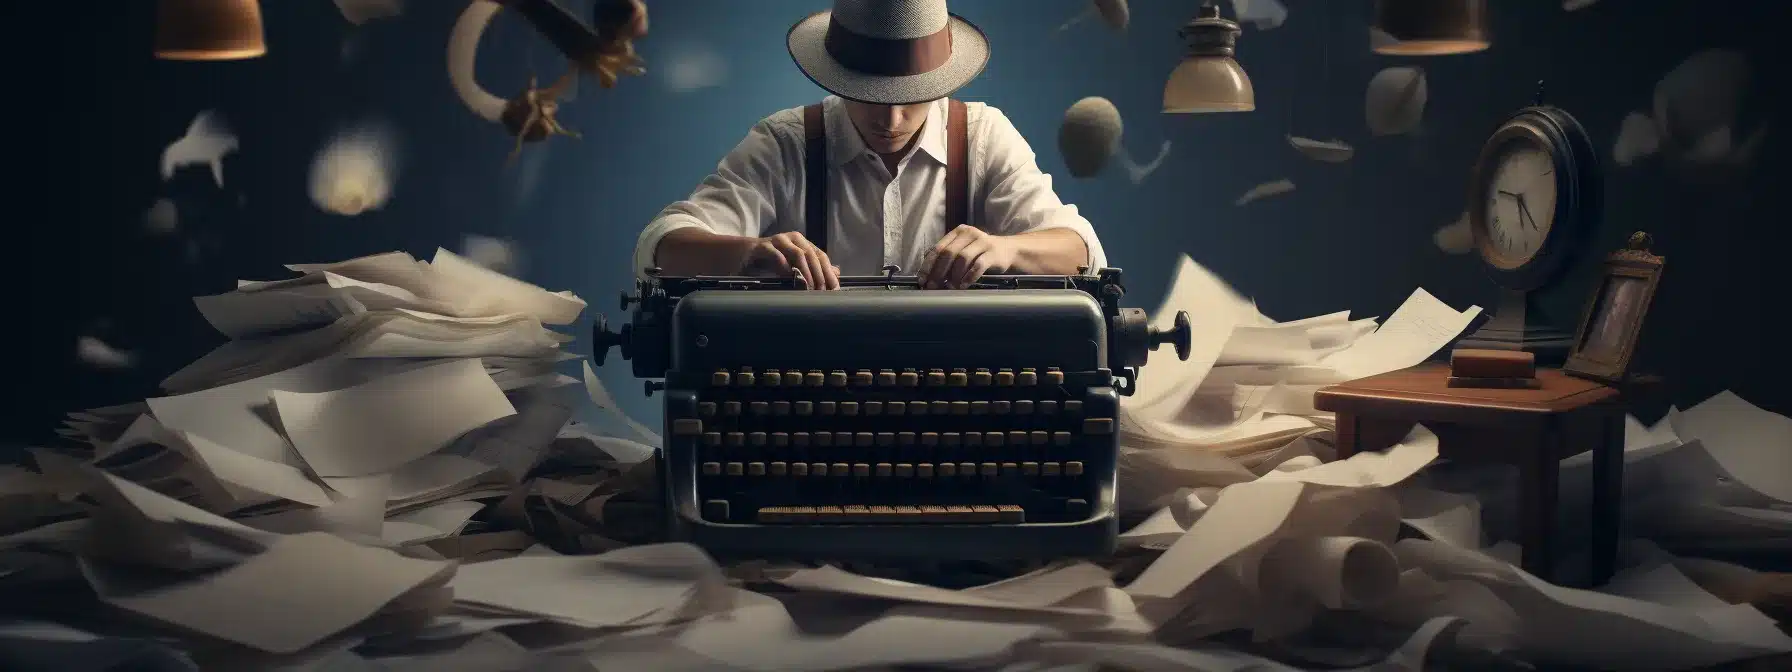 A Person Sitting At A Typewriter, Wearing A Creative Hat, With A Pile Of Papers In Front Of Them And A Magnifying Glass, Immersed In Deep Thought And Creativity.